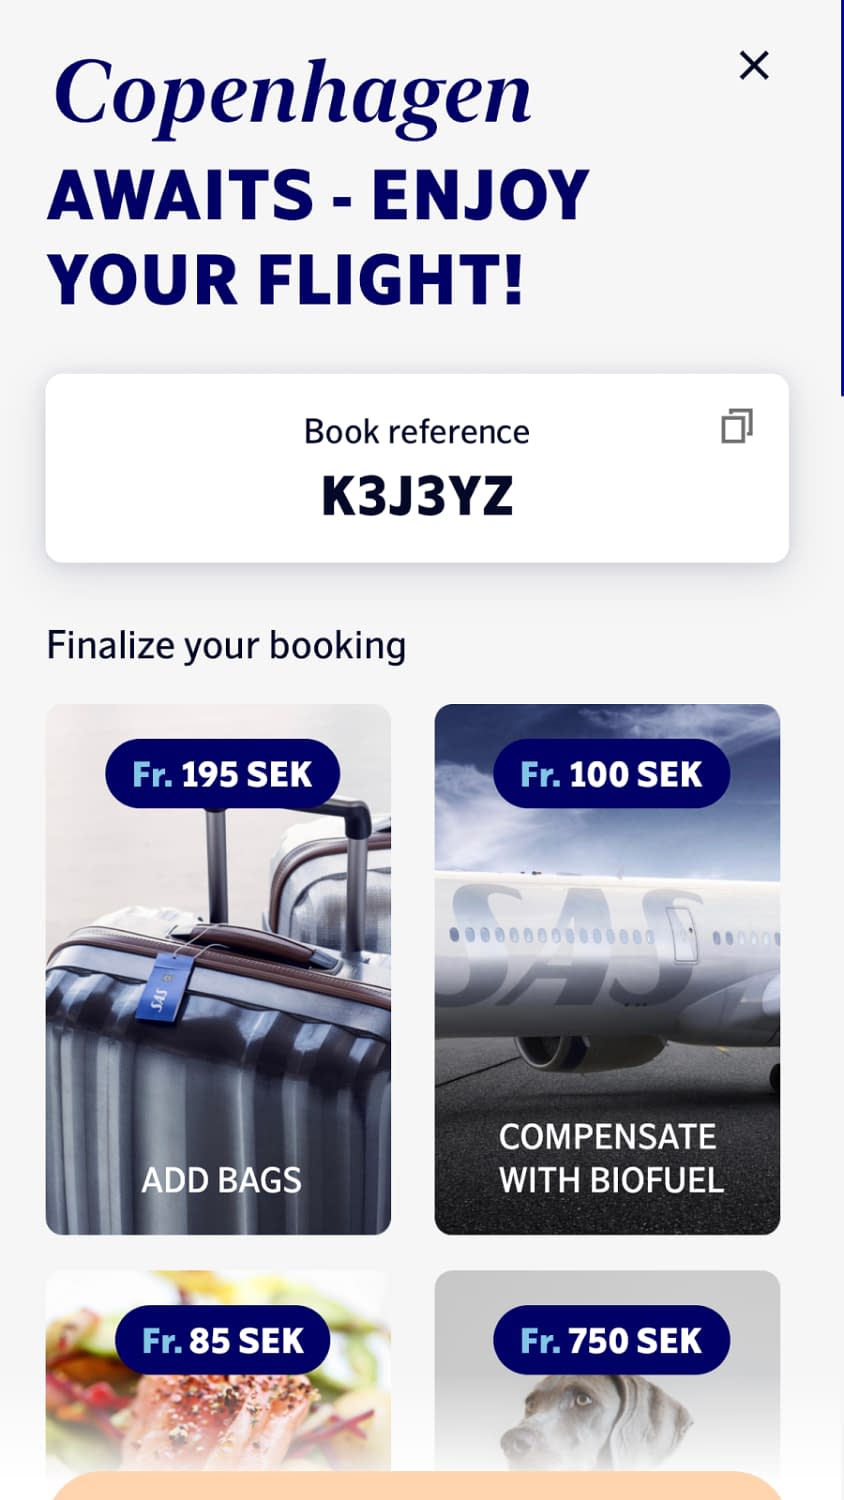 New SAS App for Android 2022 - flight view